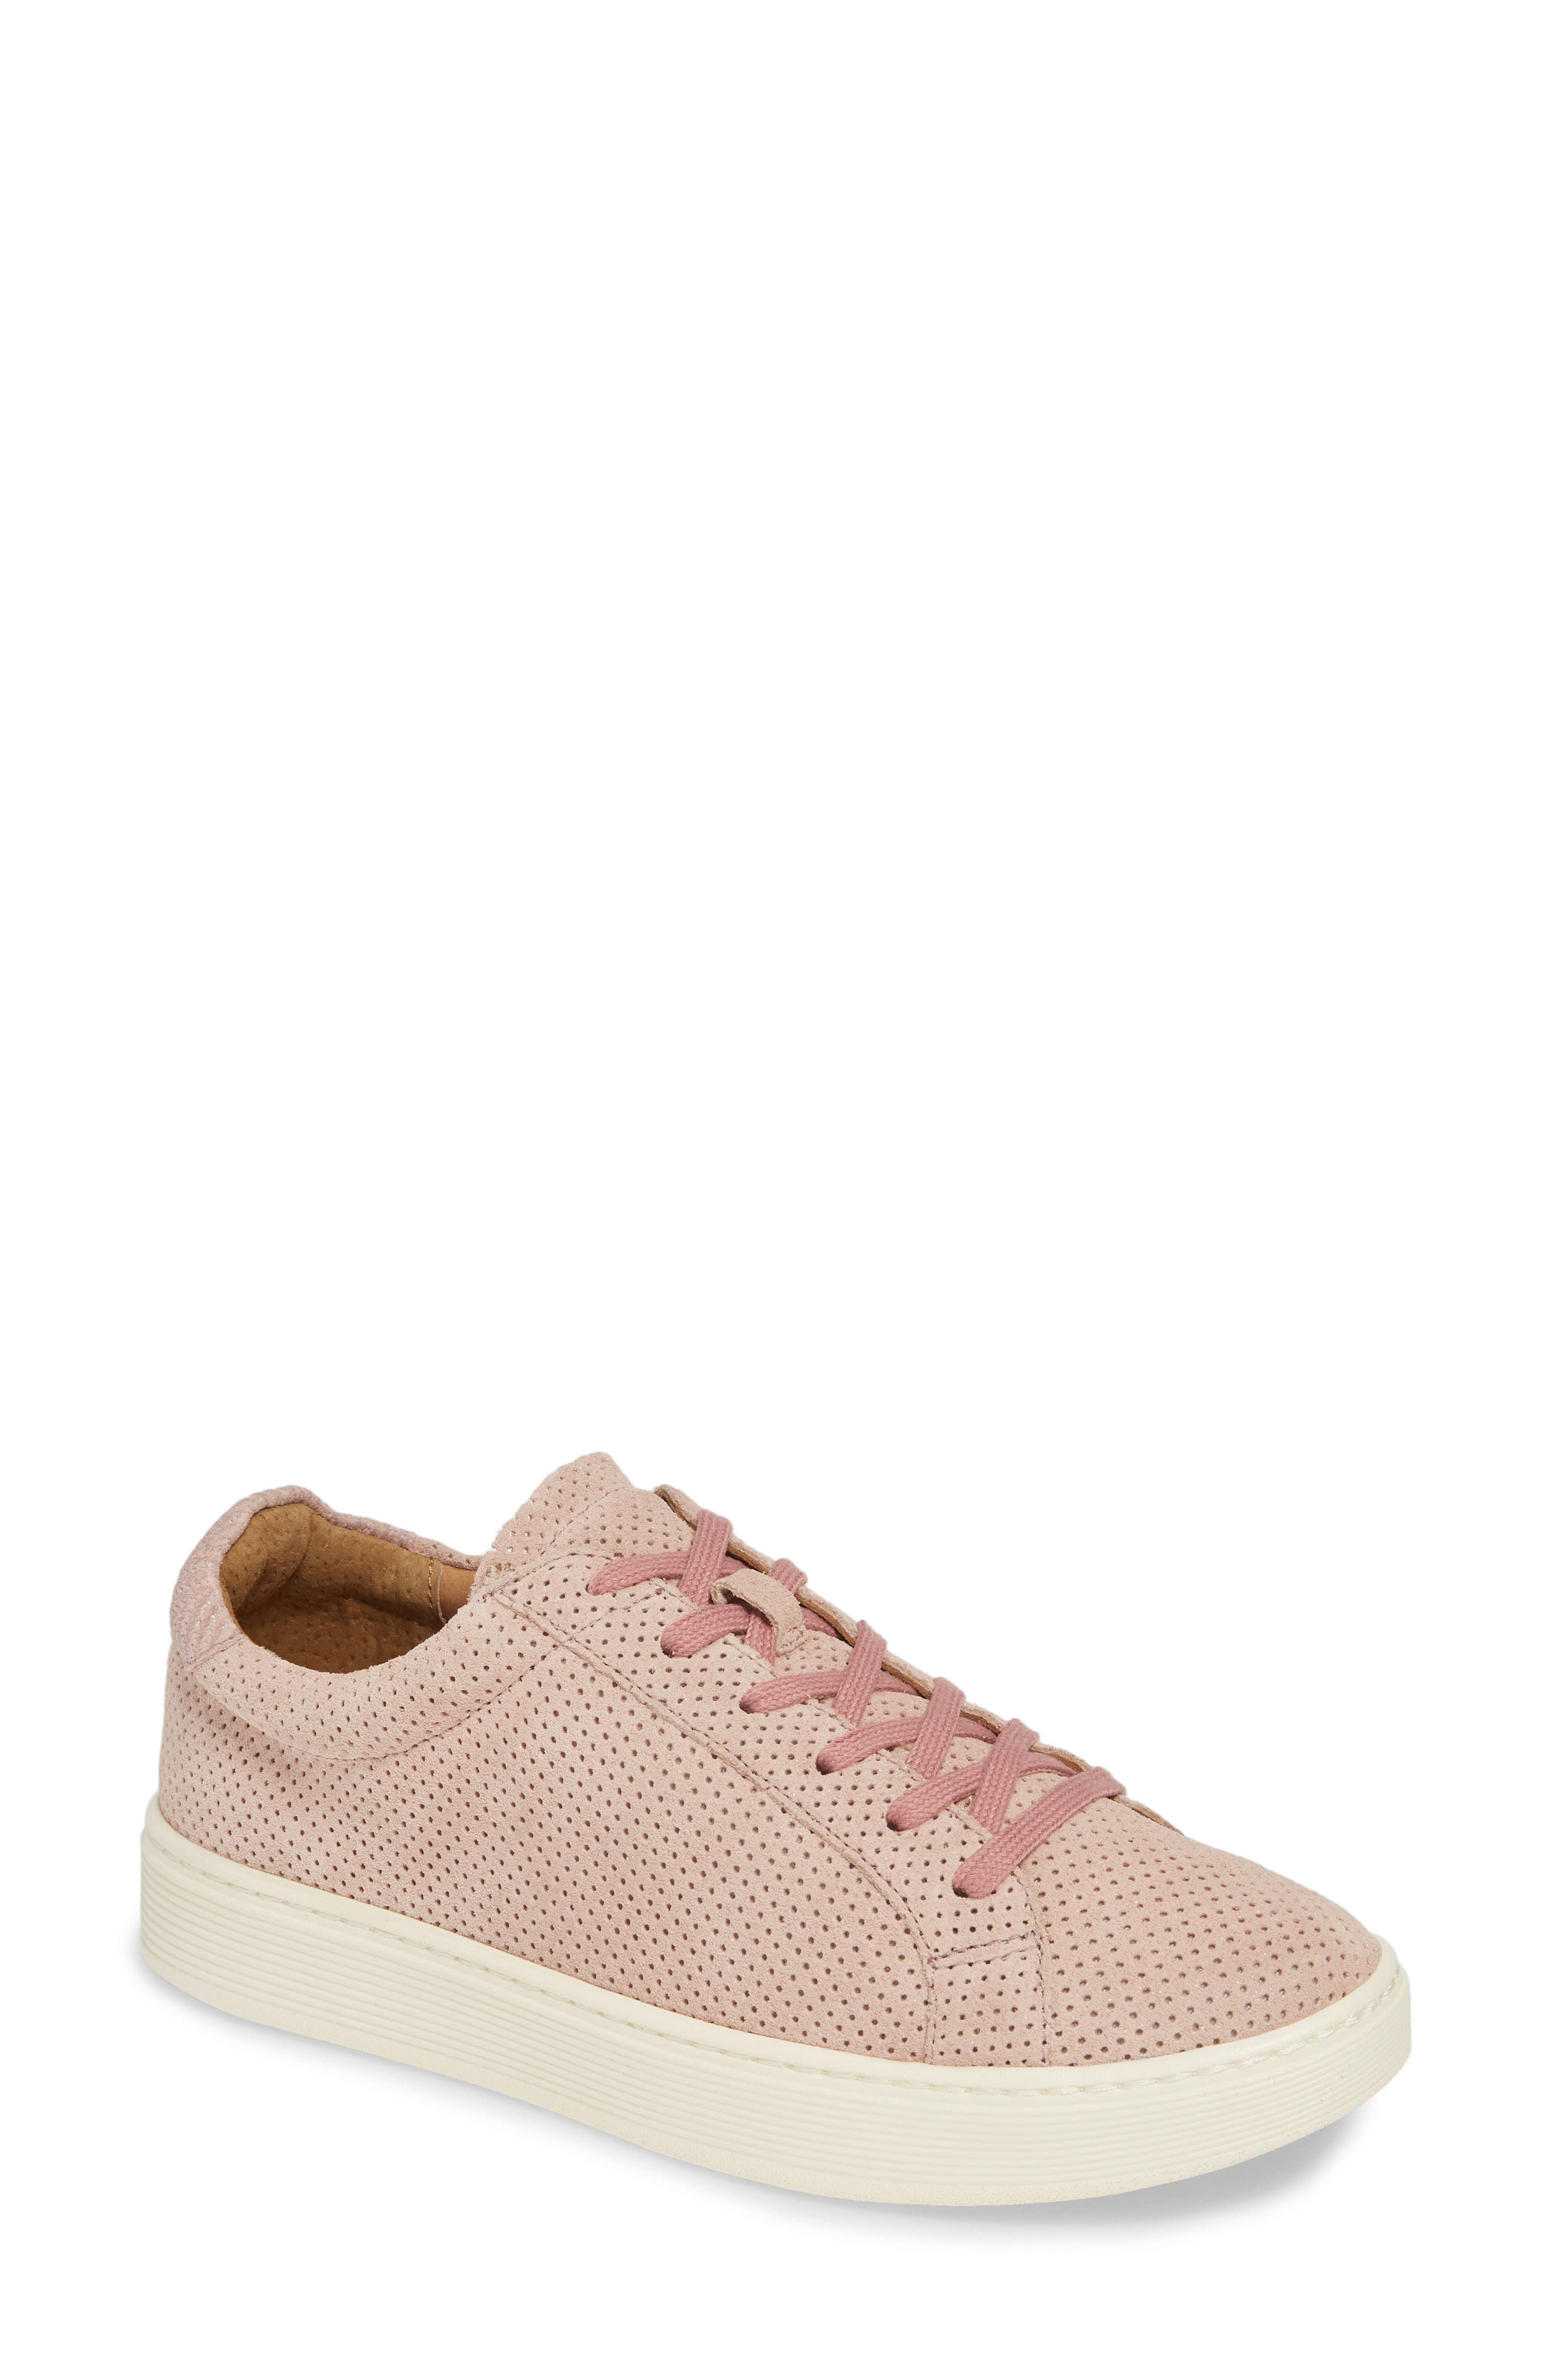 Sofft | Somers Perforated Sneaker 